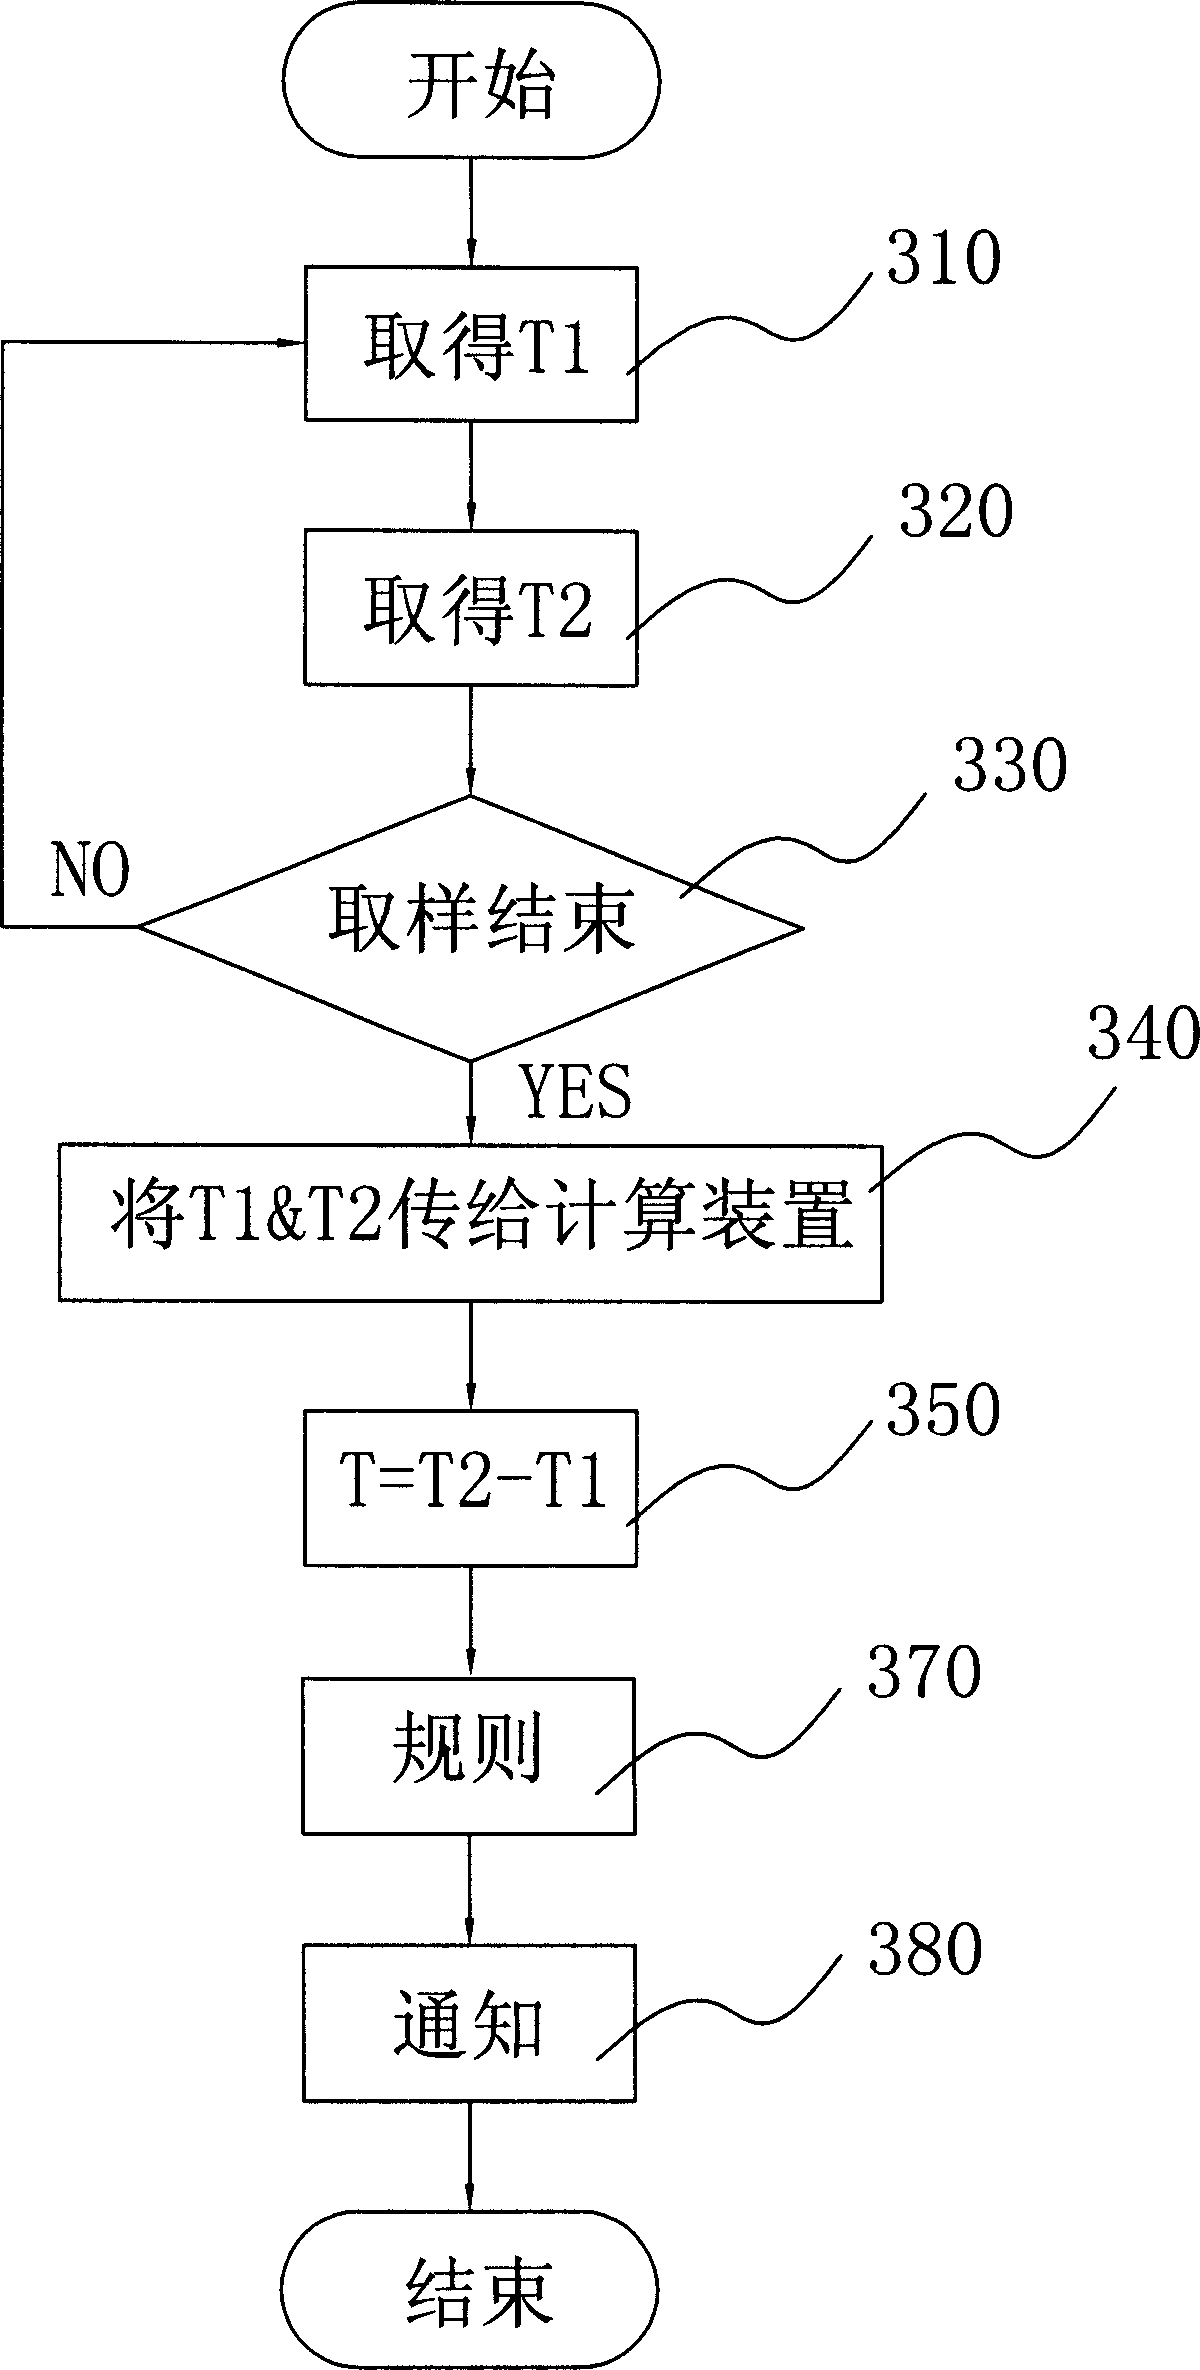 Path planning system and method